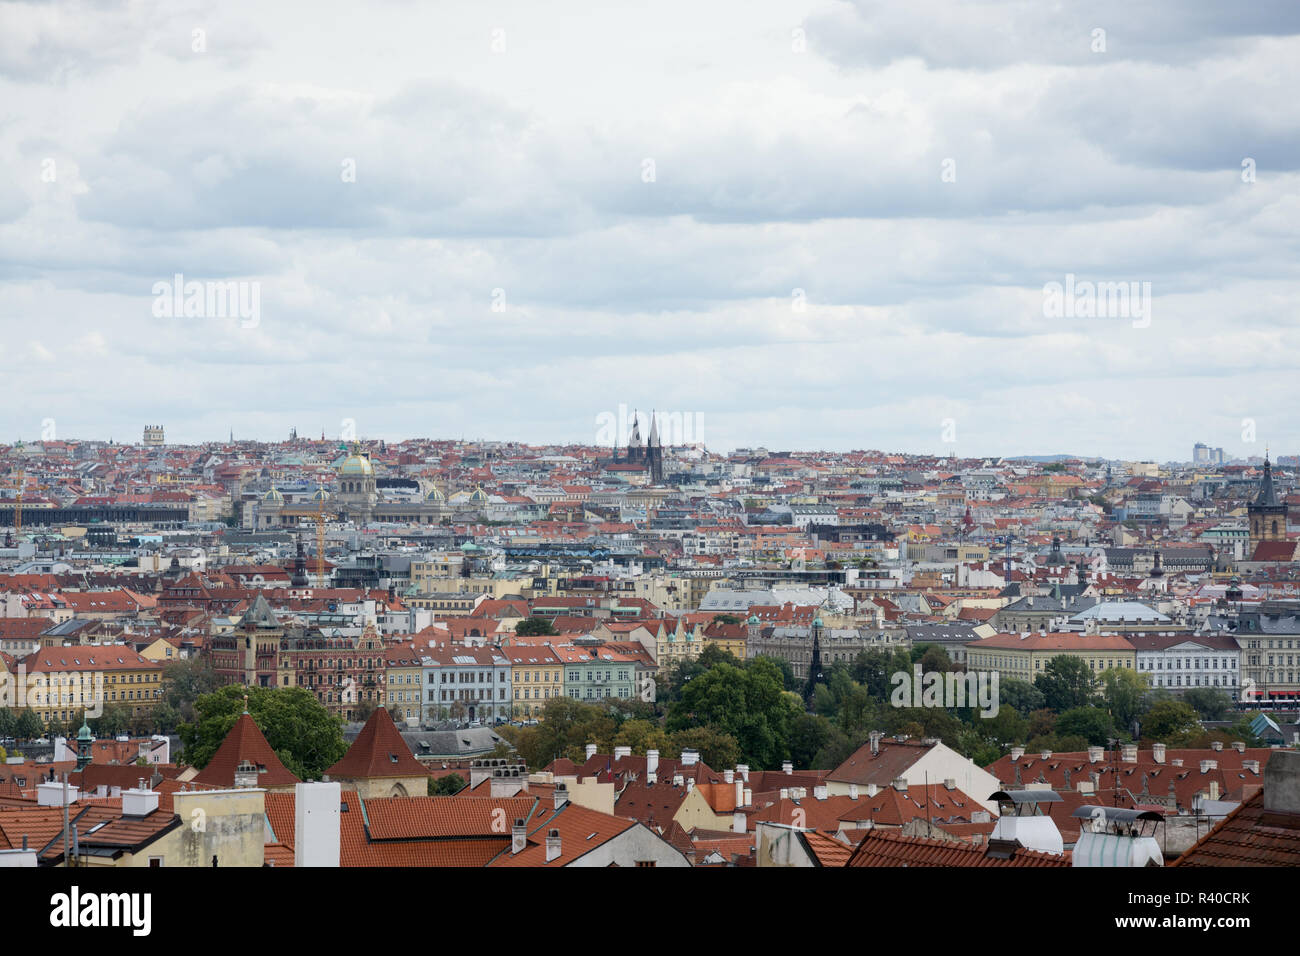 Prague panorama with colorful rooftops on a cloudy day, with The Church of St. Nicholas and Zizkov television tower in the distance Stock Photo